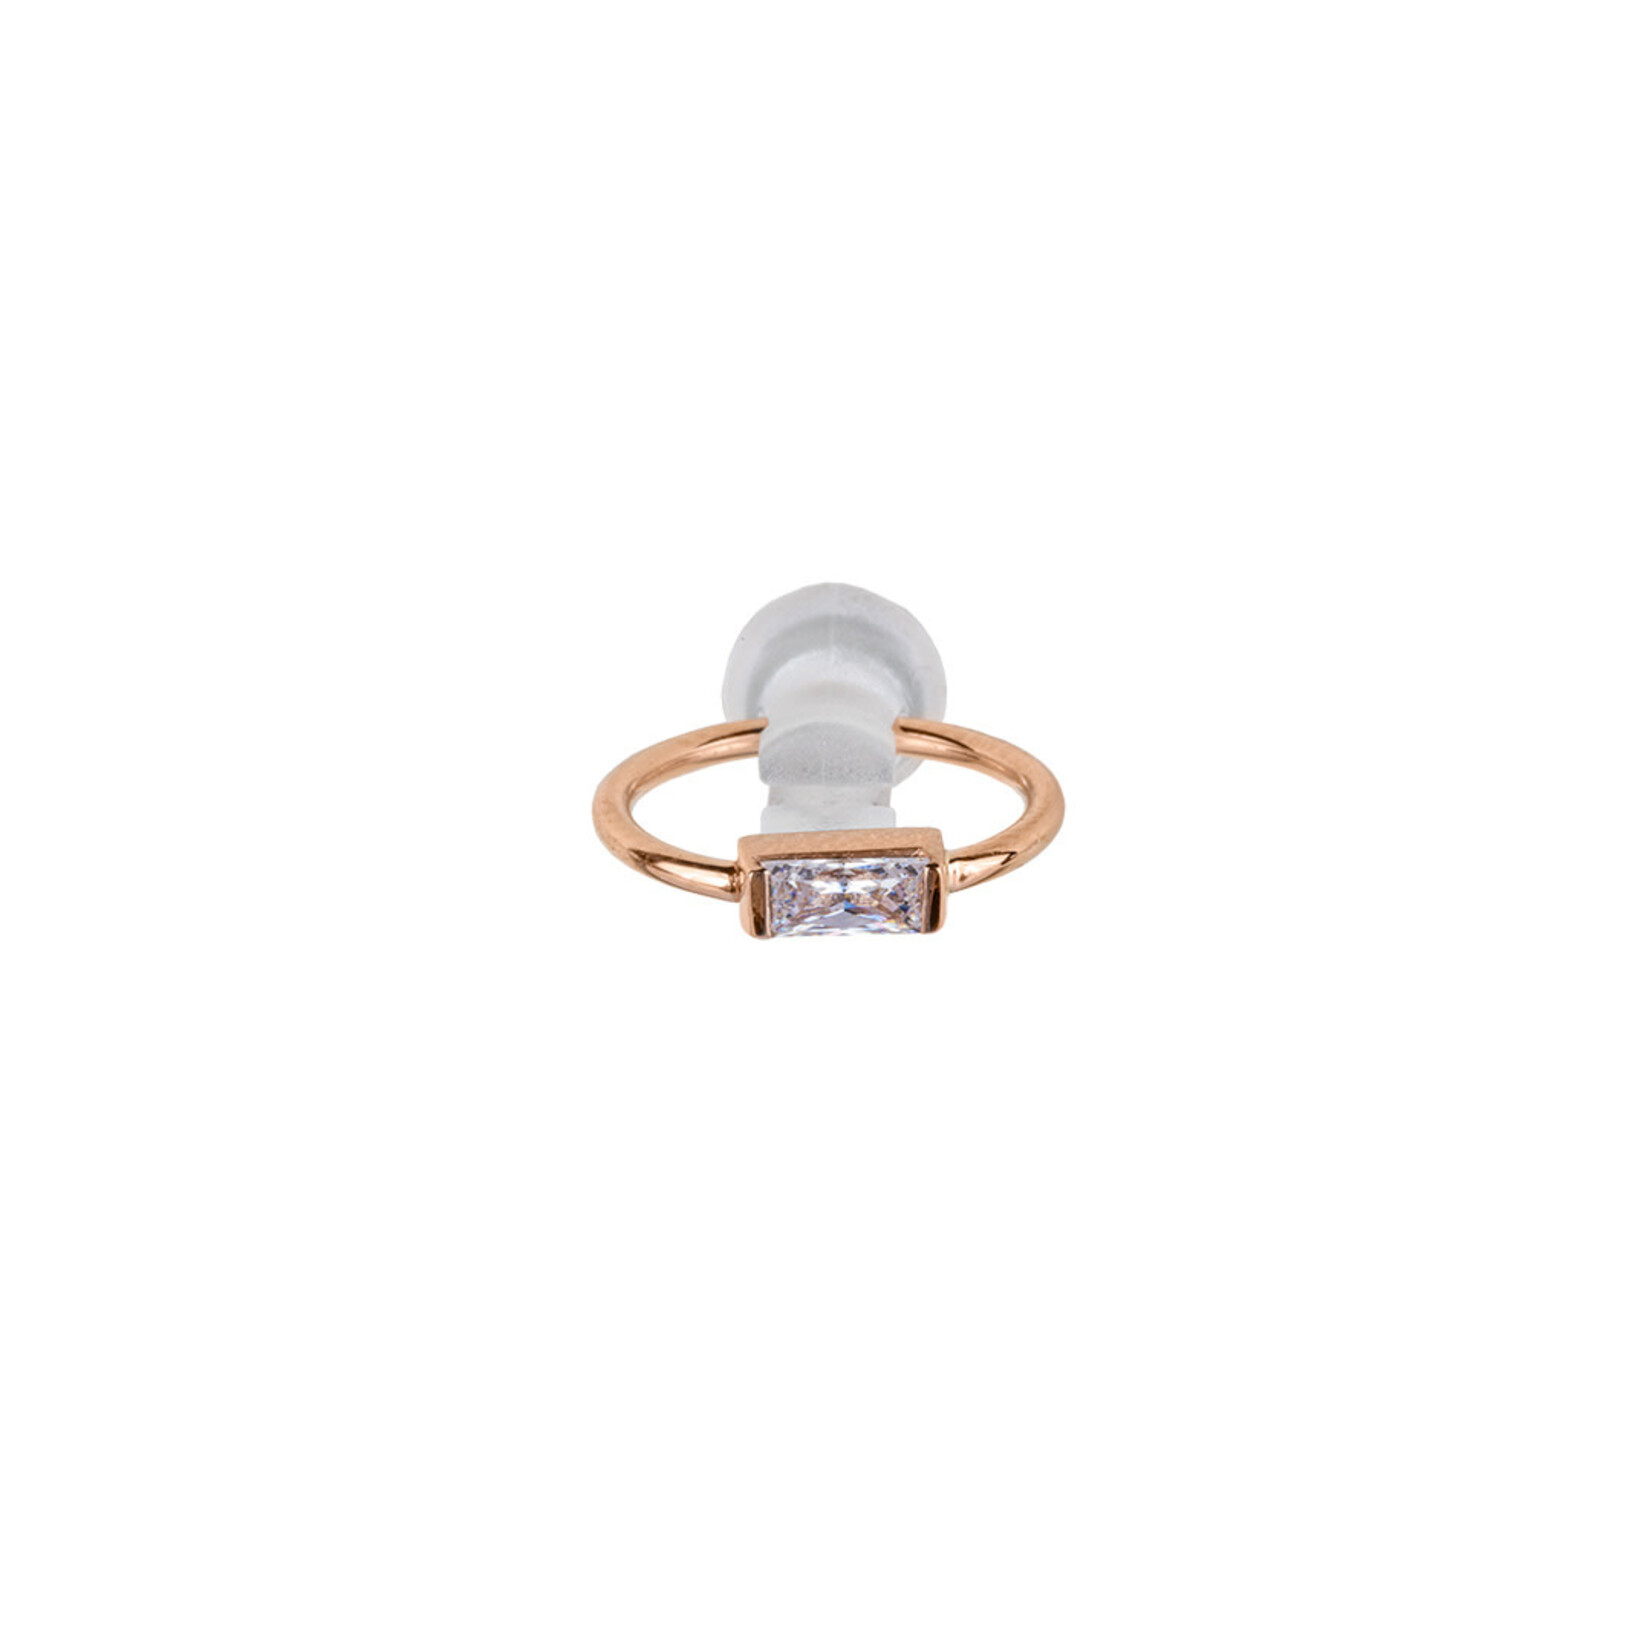 BVLA BVLA 18g Baguette fixed ring with CZ